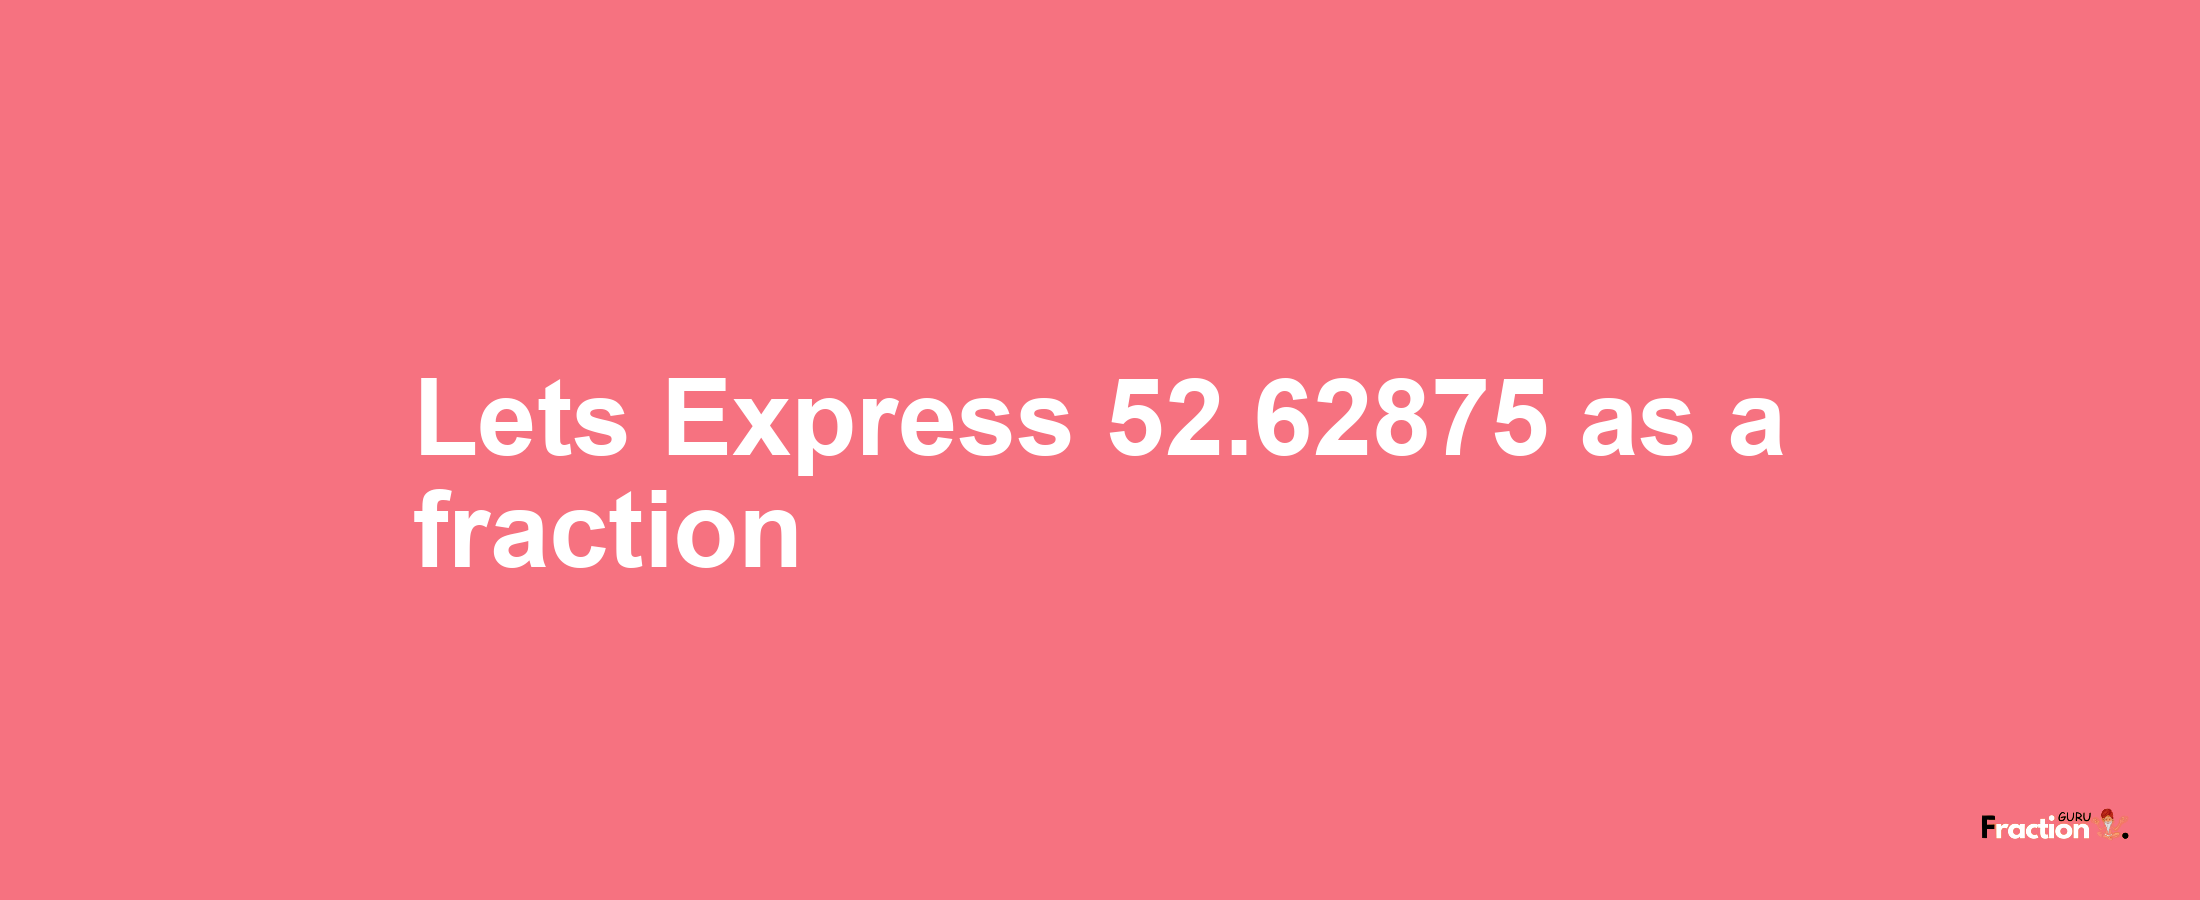 Lets Express 52.62875 as afraction